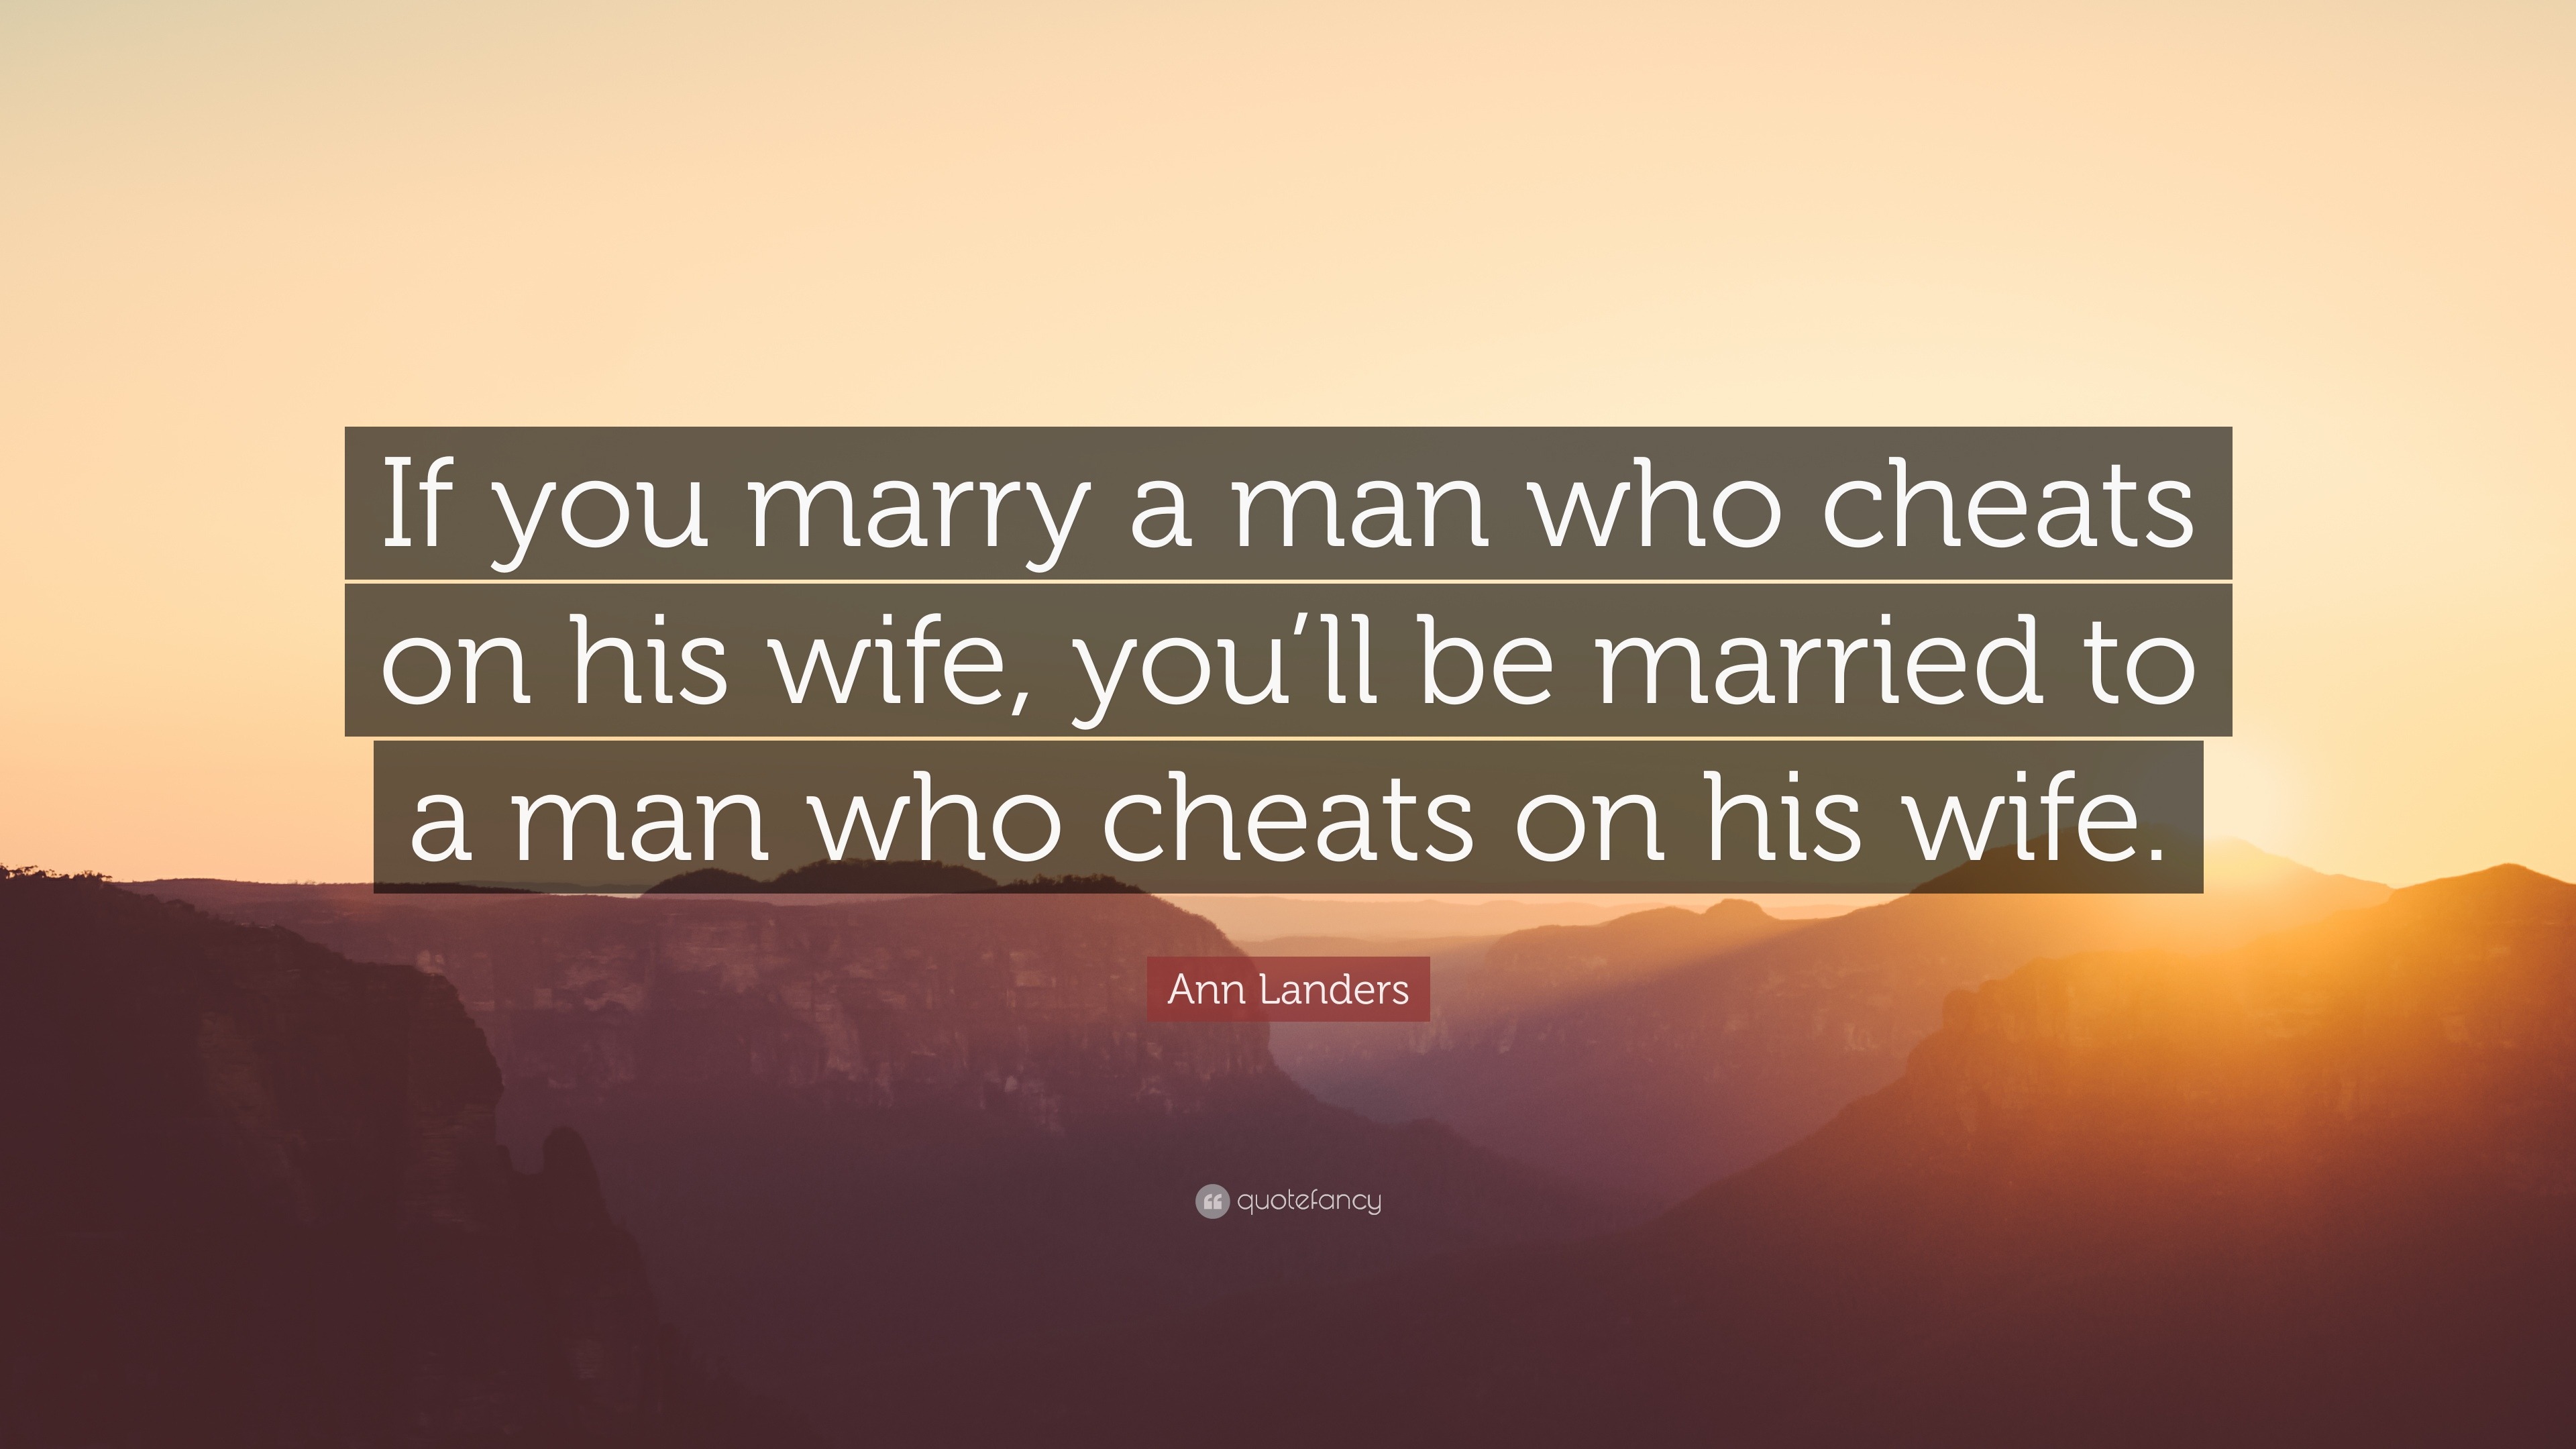 With his wife on man you a cheats when 11 Lies